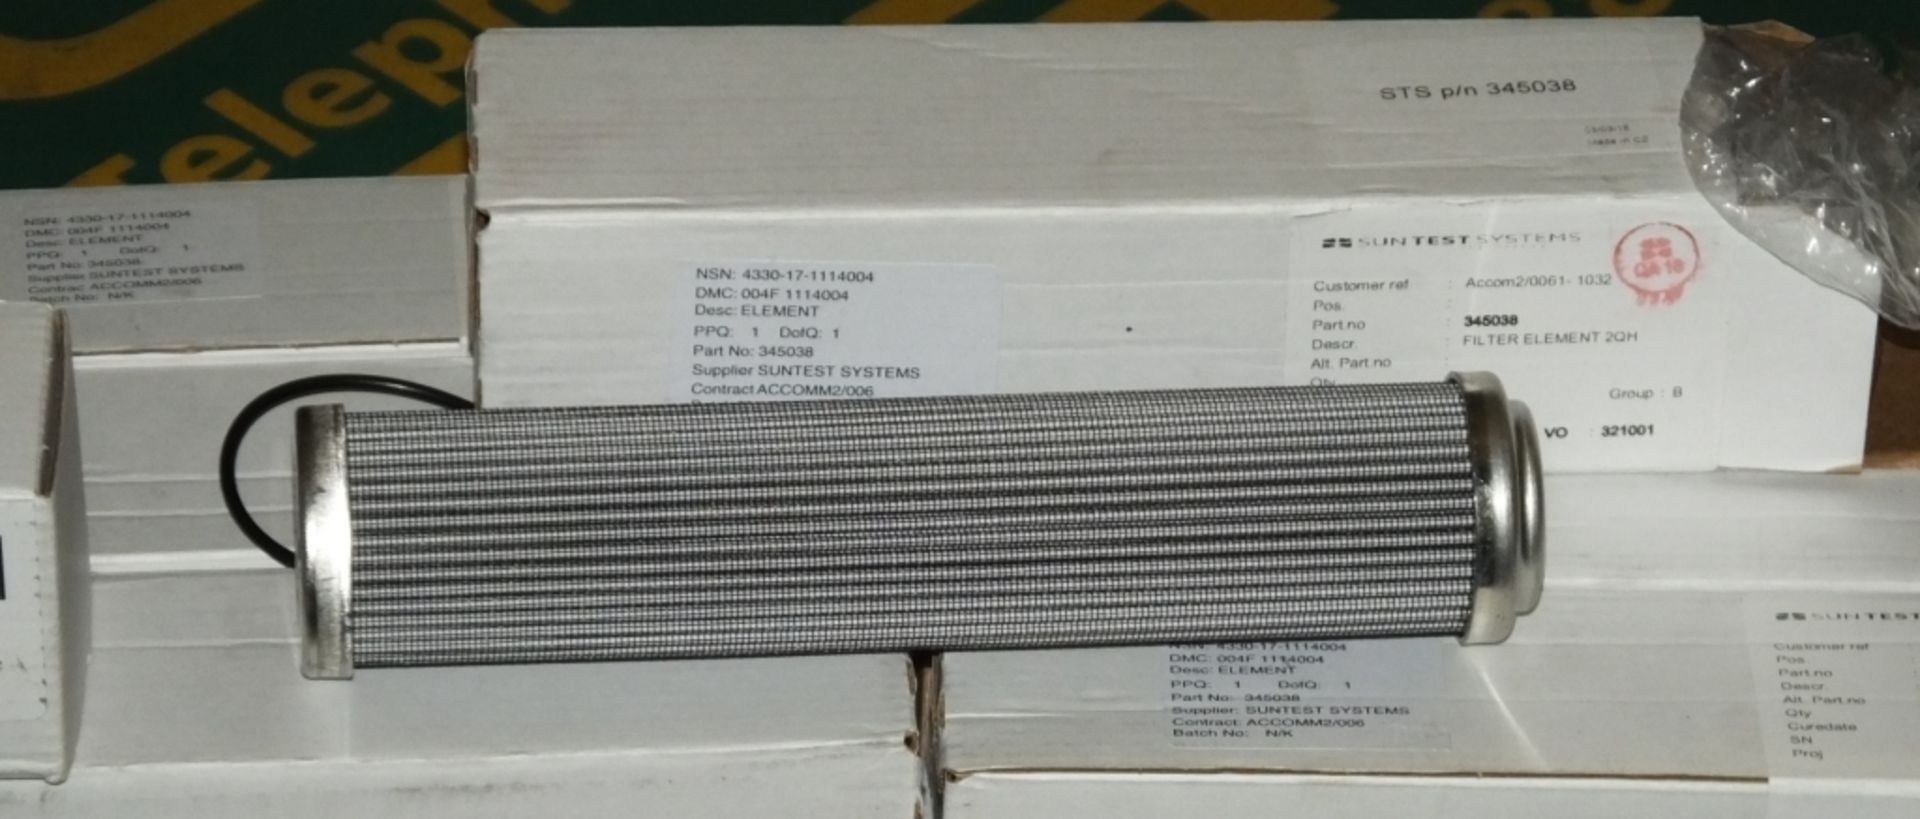 24x Suntest Systems Filter Elements 2QH NSN 4330-17-111-4004 - Image 2 of 3